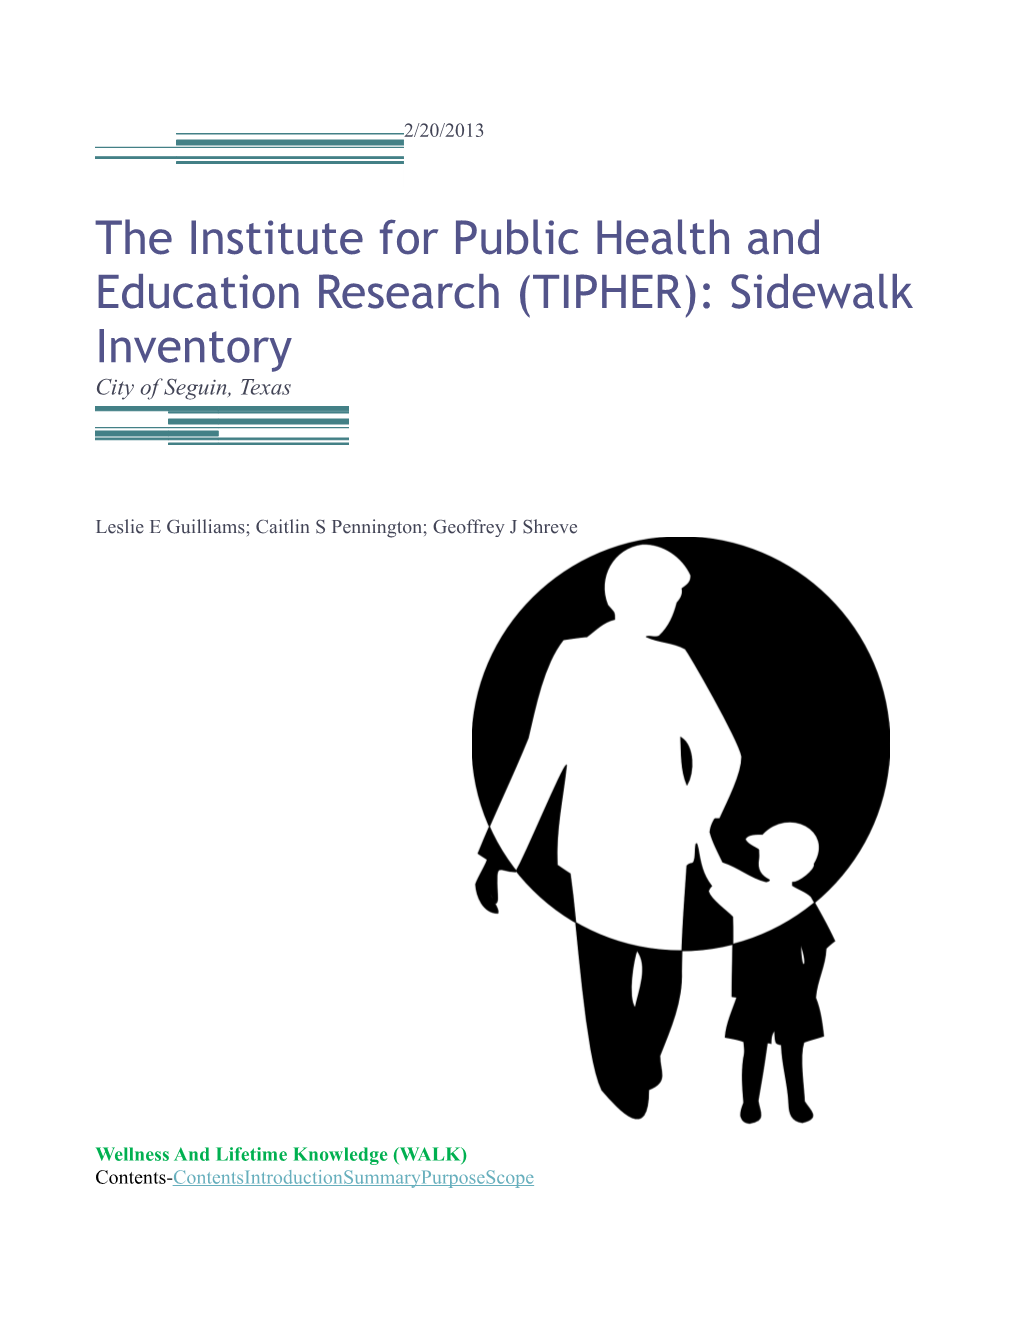 The Institute for Public Health and Education Research (TIPHER): Sidewalk Inventory